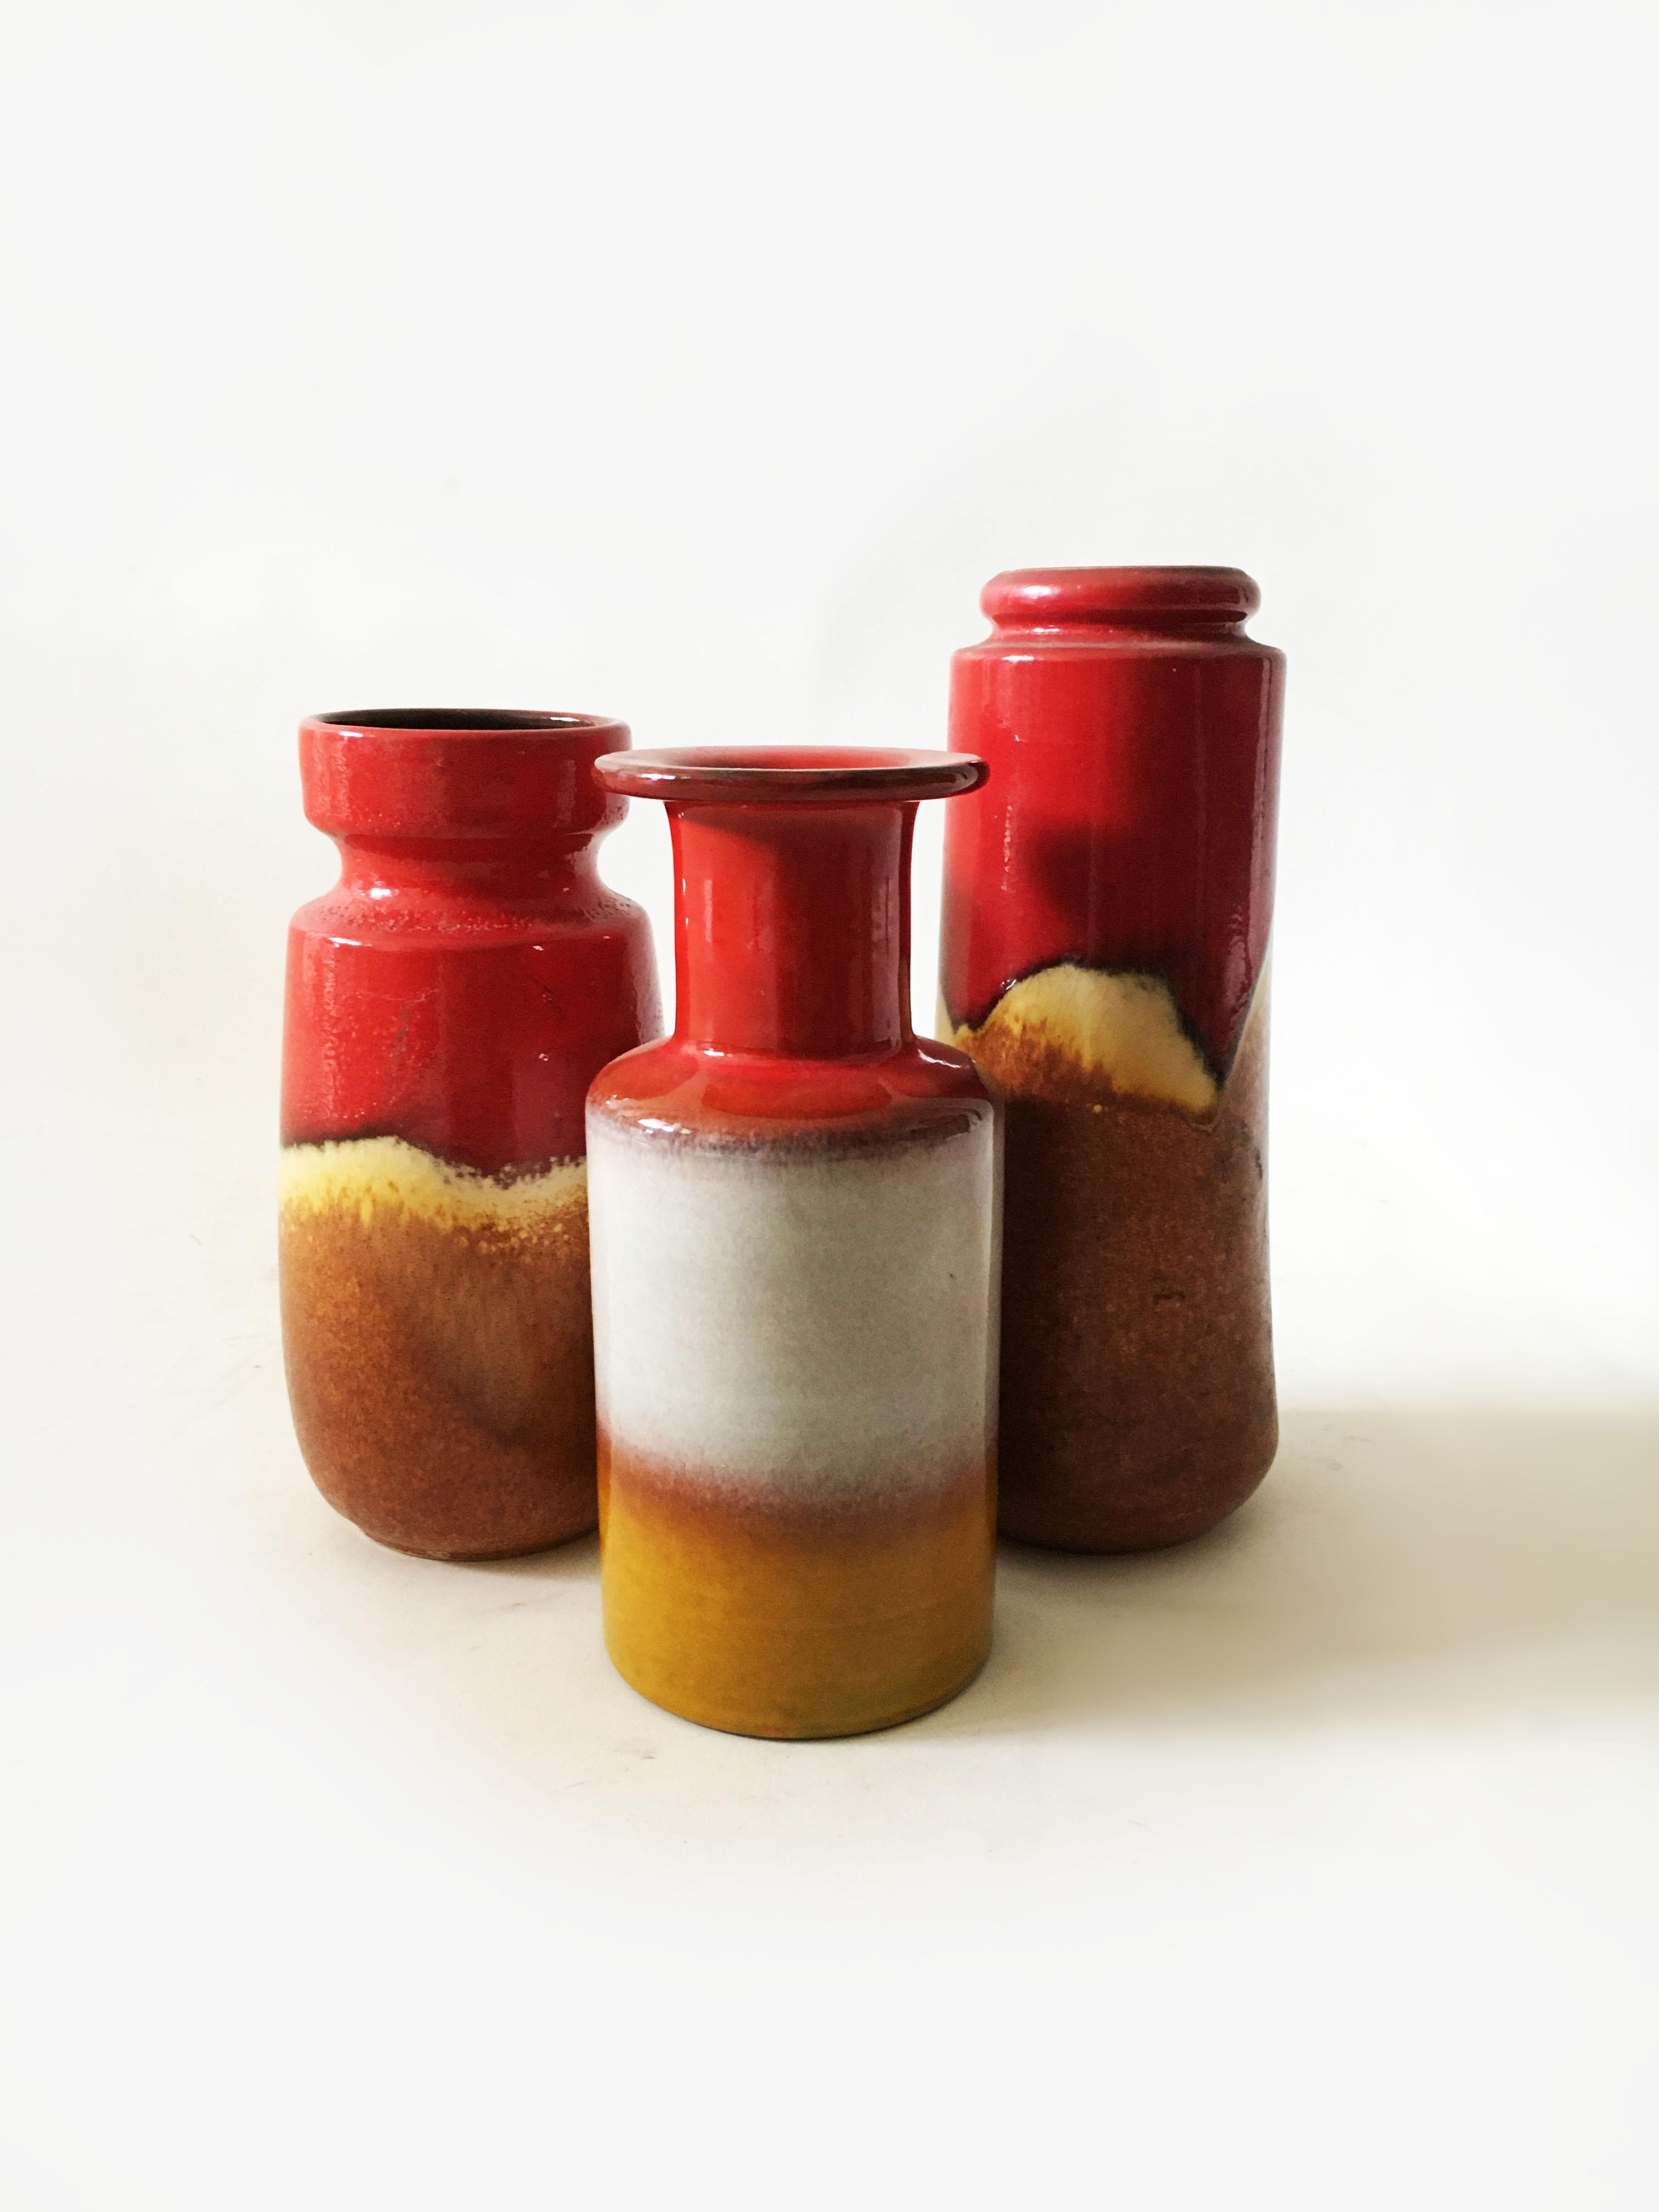 Ceramic Mid-Century Modern Vintage Vase Collection 'Rothko' Set of Three, Germany, 1970s For Sale